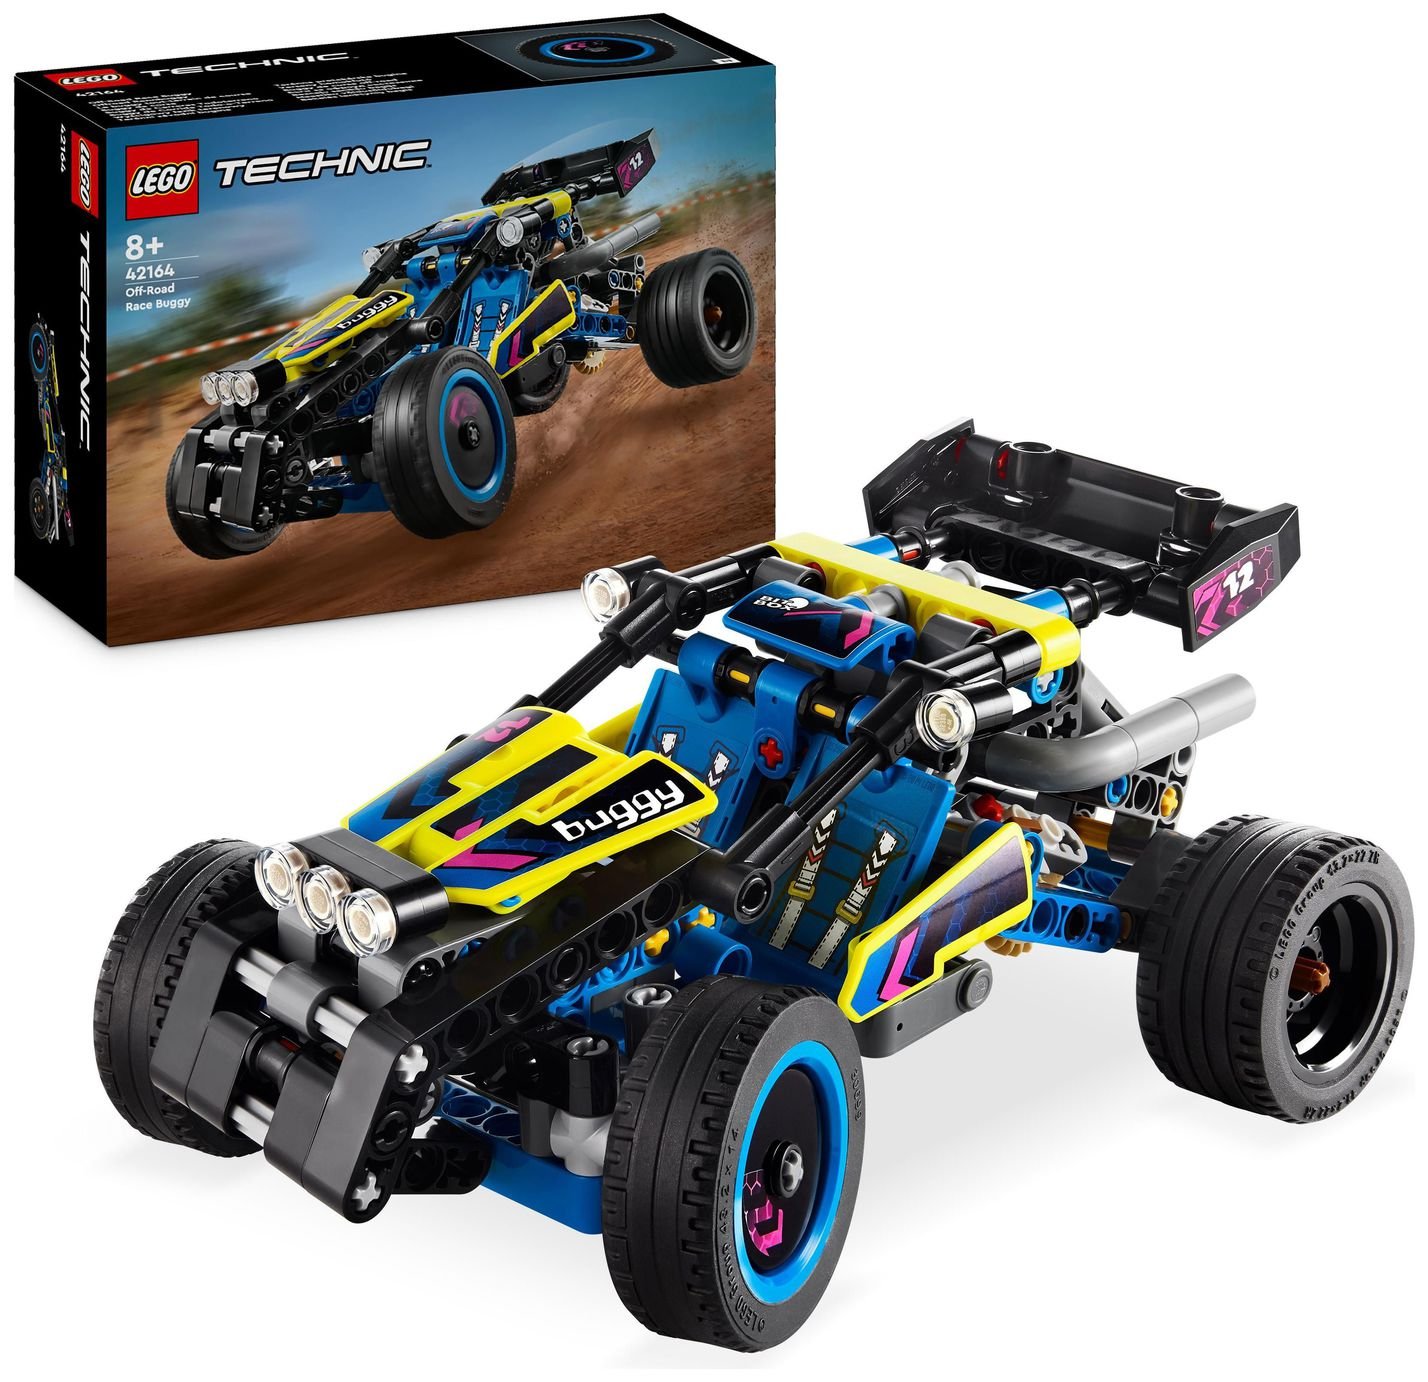 LEGO Technic Off-Road Race Buggy Car Vehicle Toy 42164